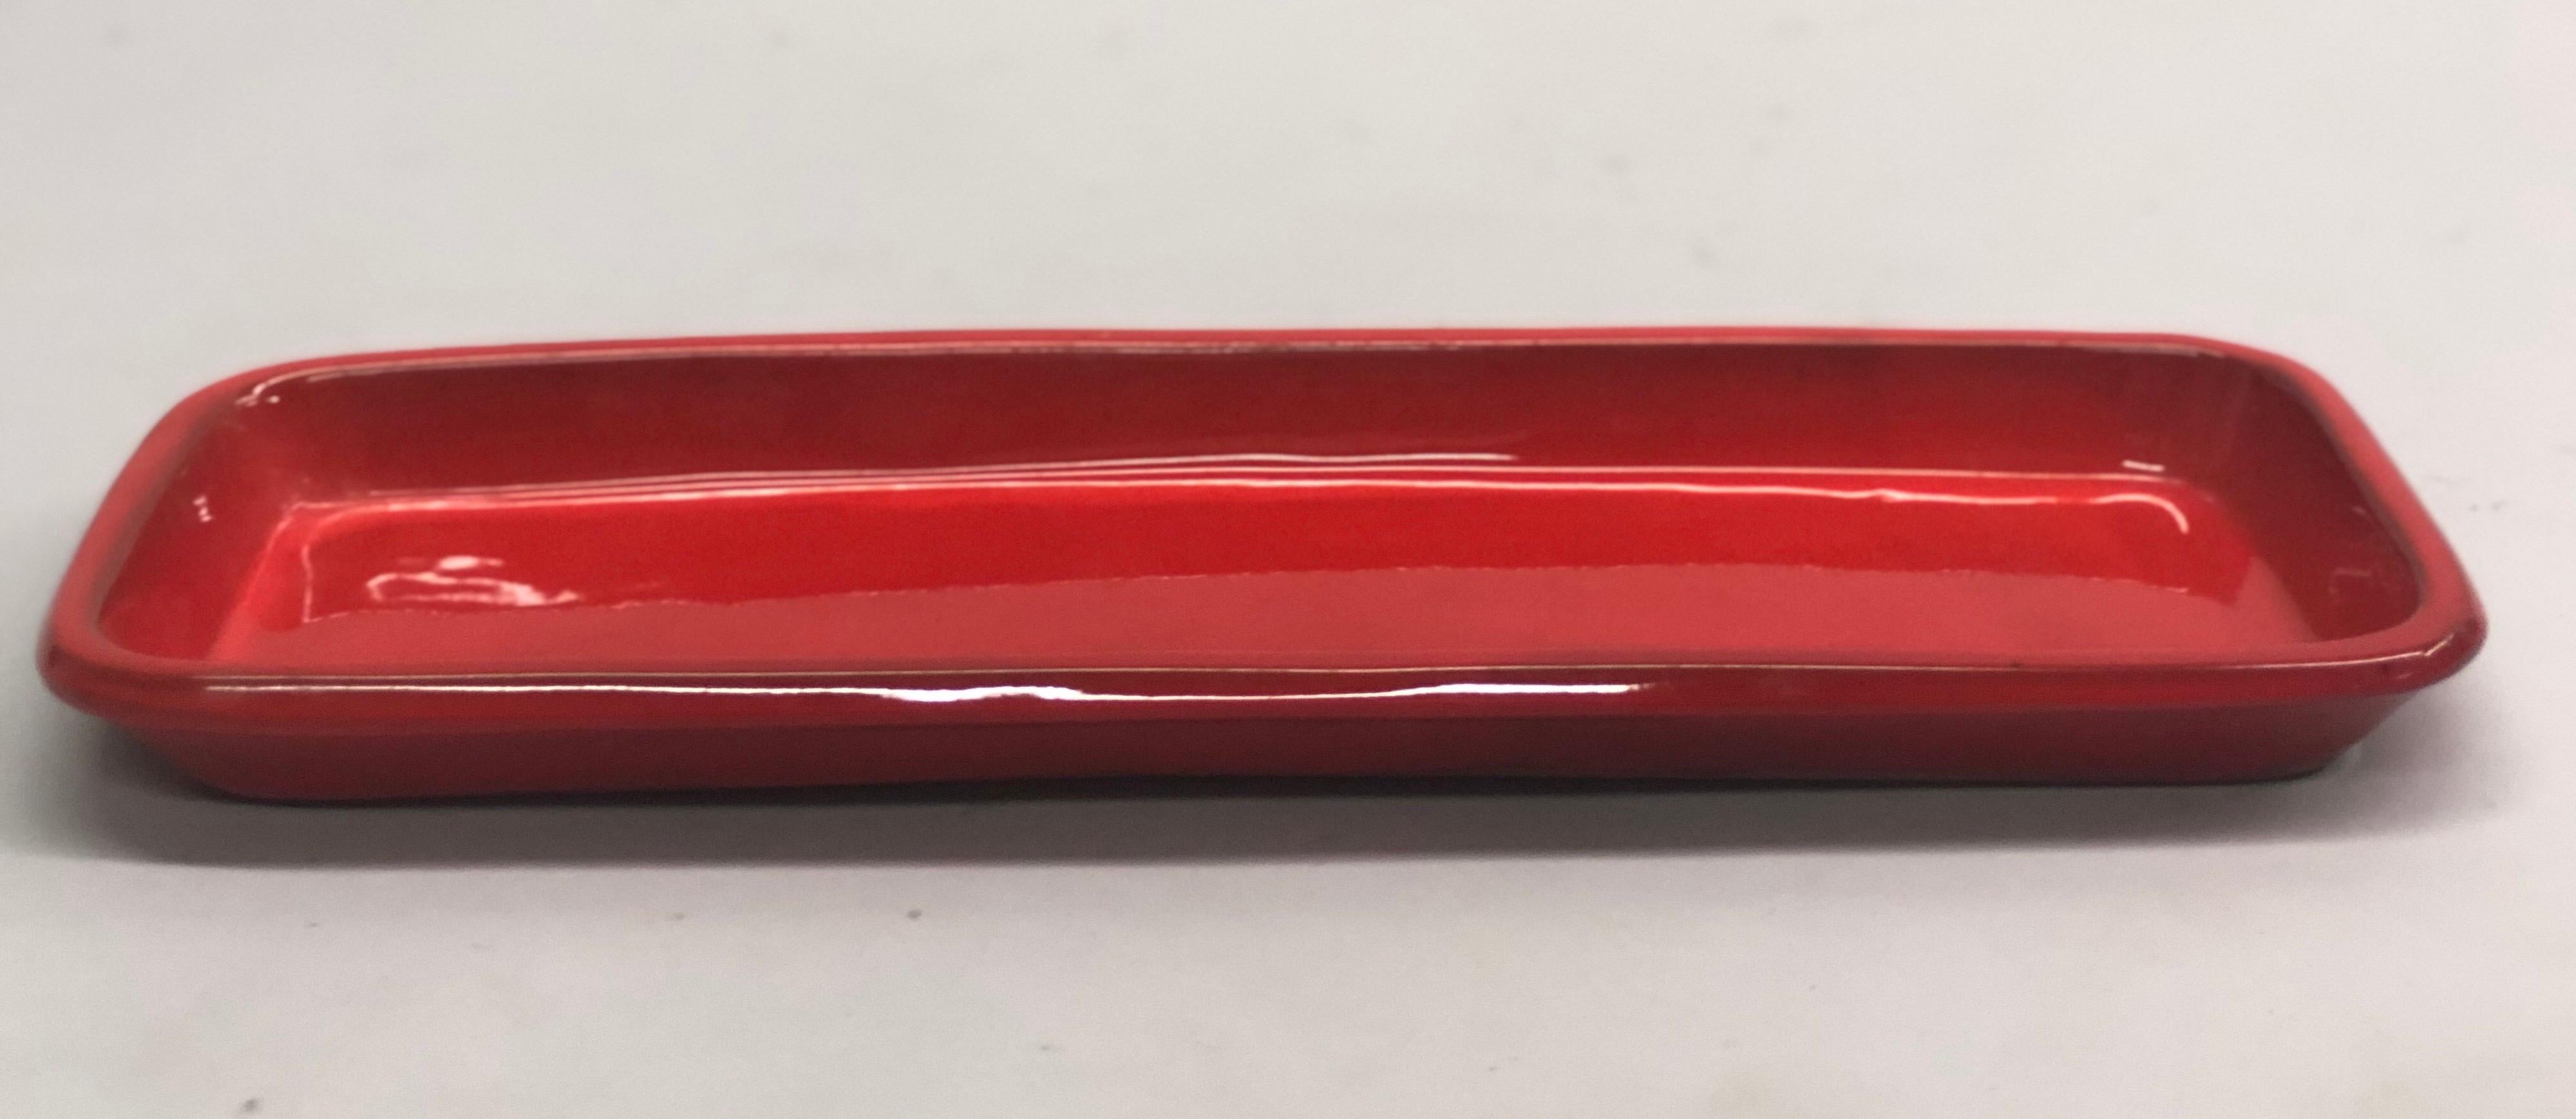 Large French Midcentury Oval Red Ceramic Serving Platter by Voltz, Vallauris In Good Condition For Sale In New York, NY